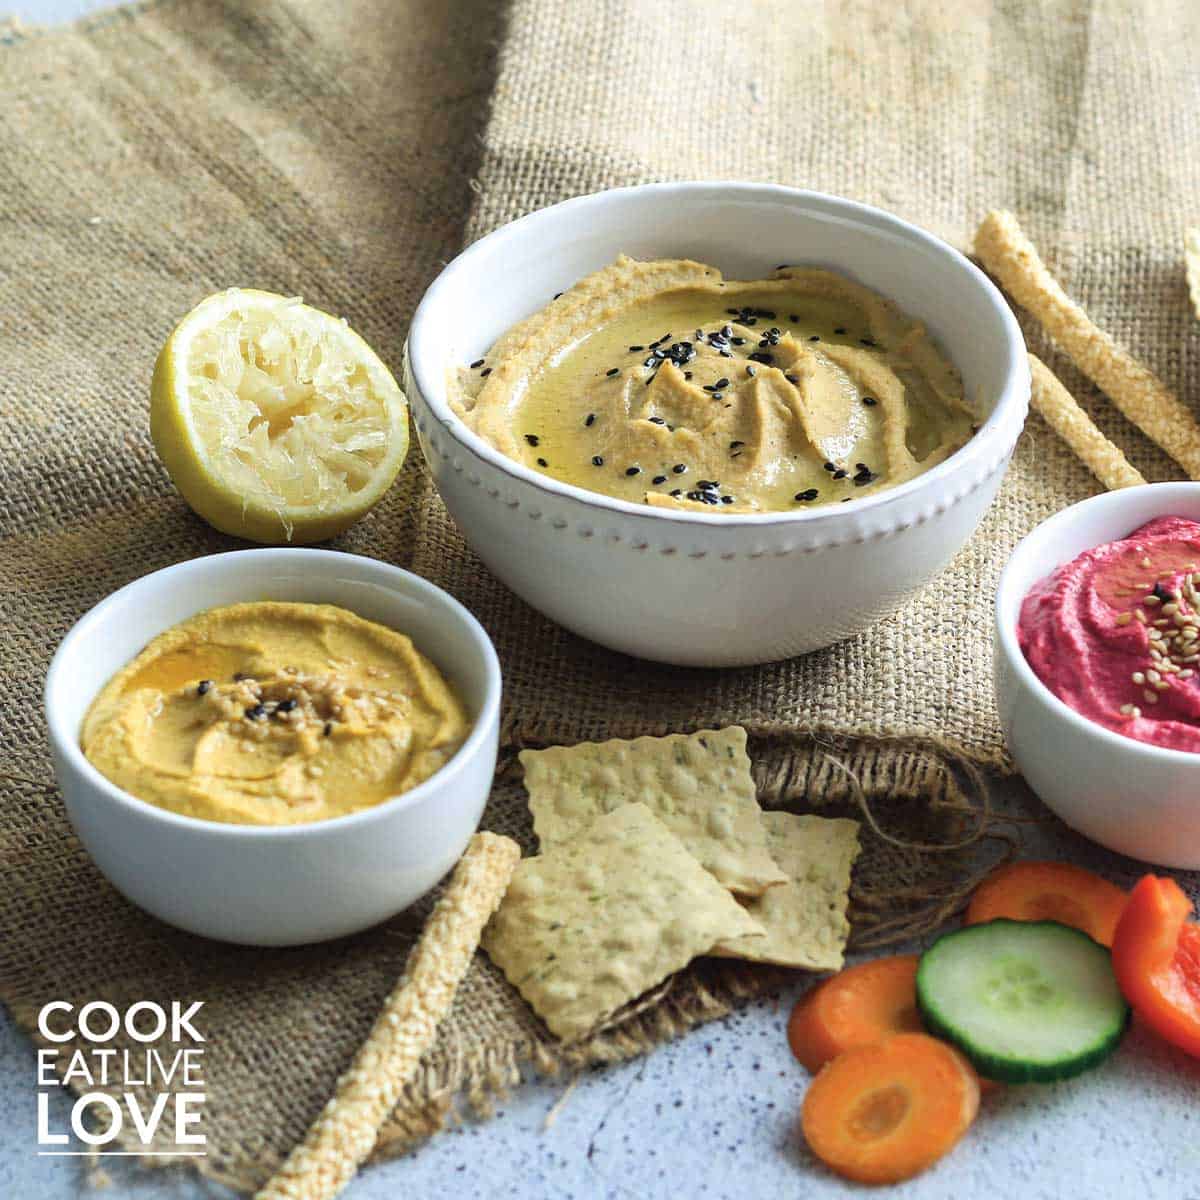 All three easy vegetable hummus served up in white bowls on the table